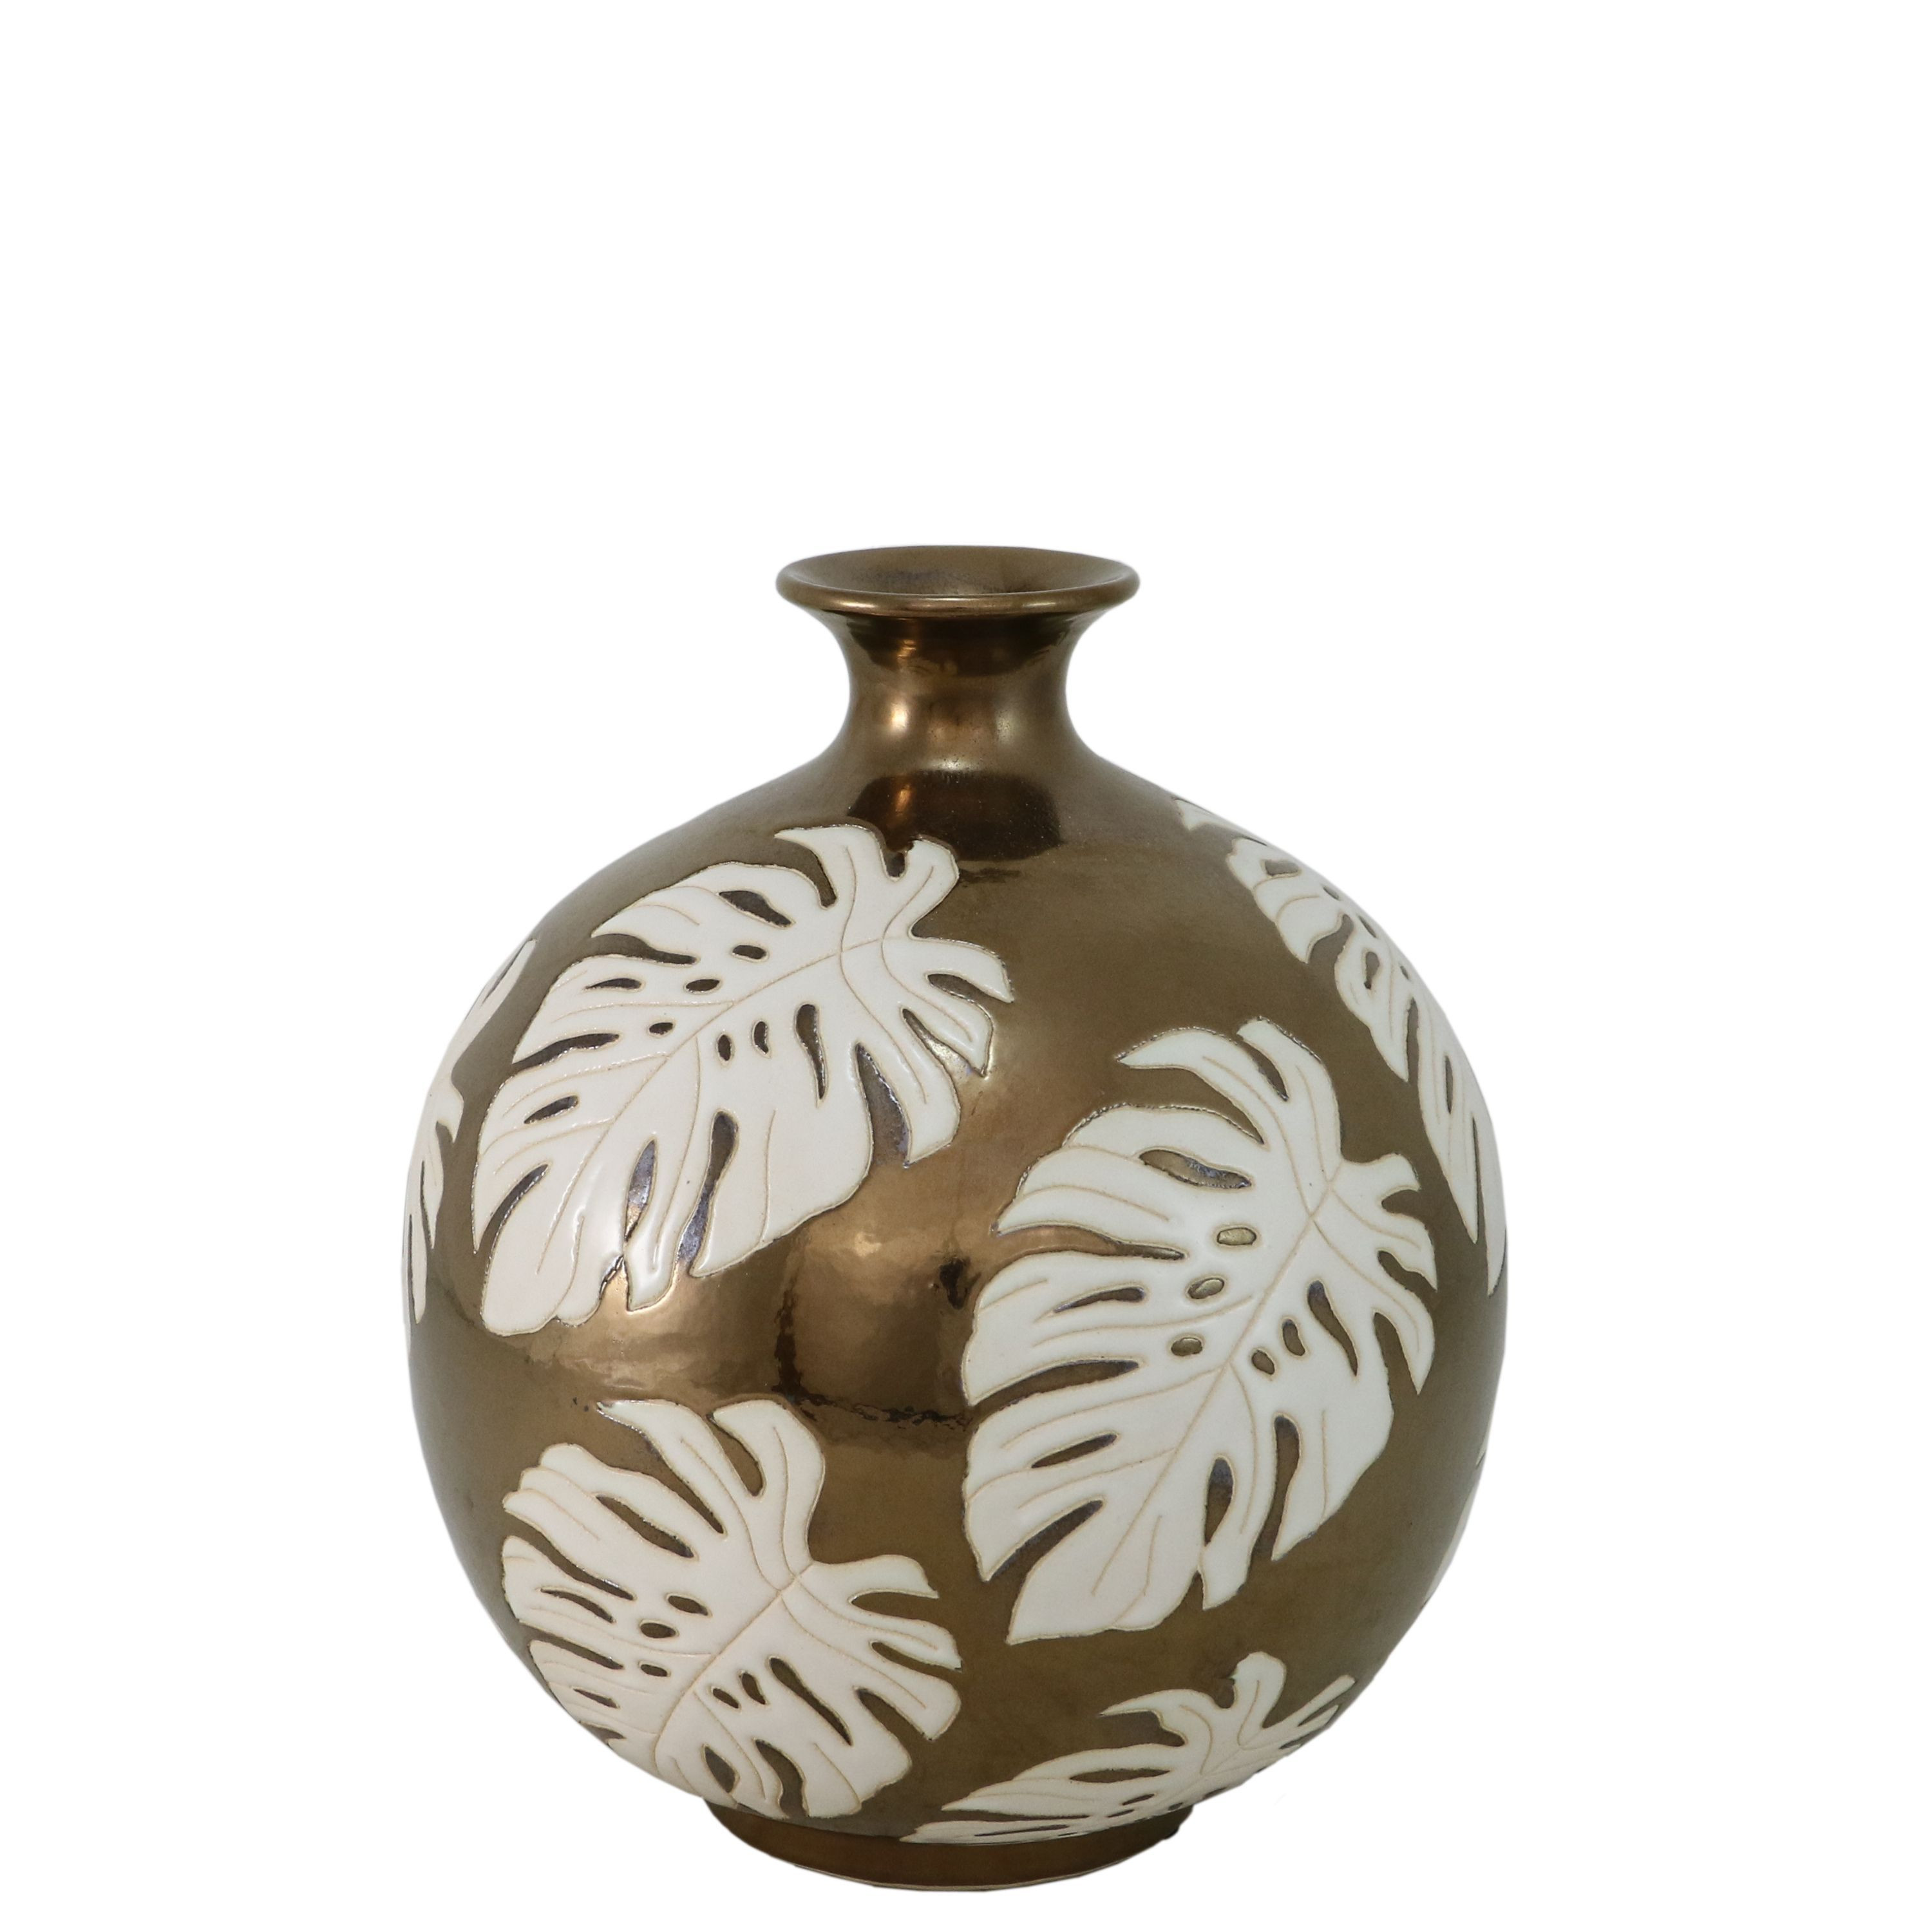 26 Fantastic Tiffany Swirl Glass Vase 2024 free download tiffany swirl glass vase of 33 wayfair floor vases the weekly world with importcollection item 18 370 bali round vase